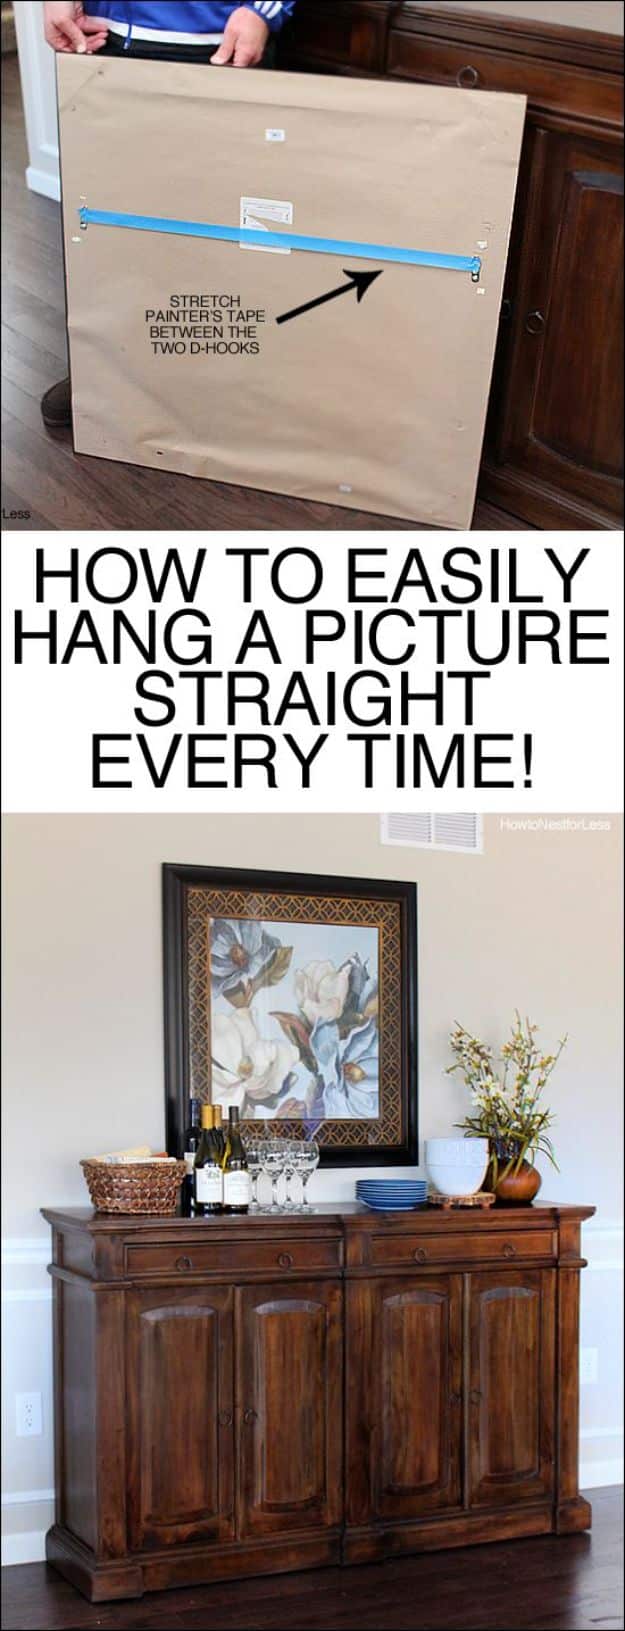 hang hanging frames tips easily way diy tricks straight diyjoy howtonestforless frame walls decor paintings easy absolute nest less perfectly